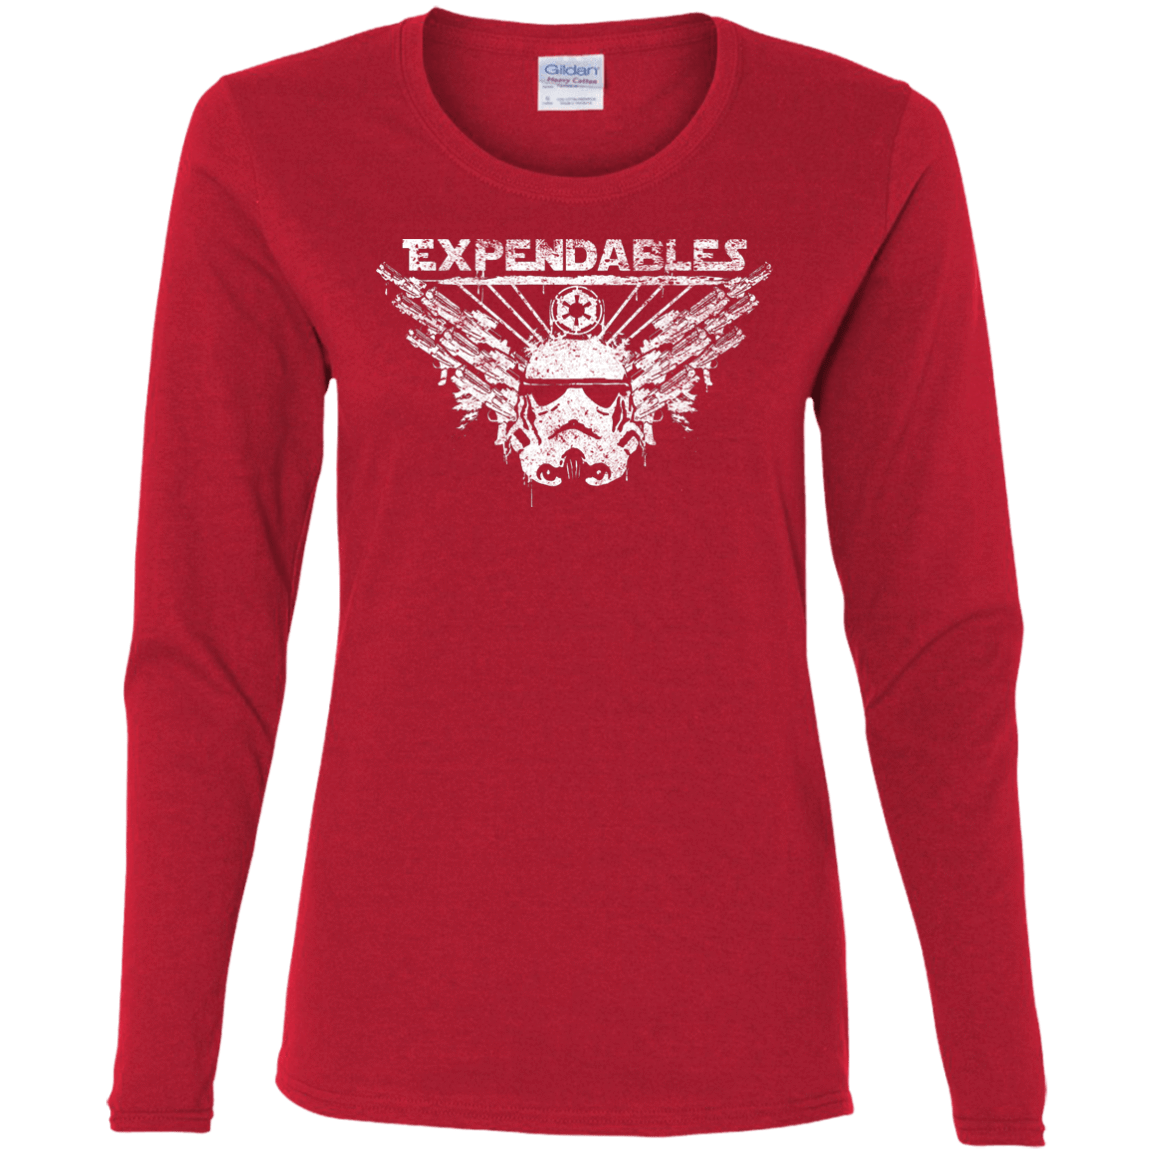 T-Shirts Red / S Expendable Troopers Women's Long Sleeve T-Shirt